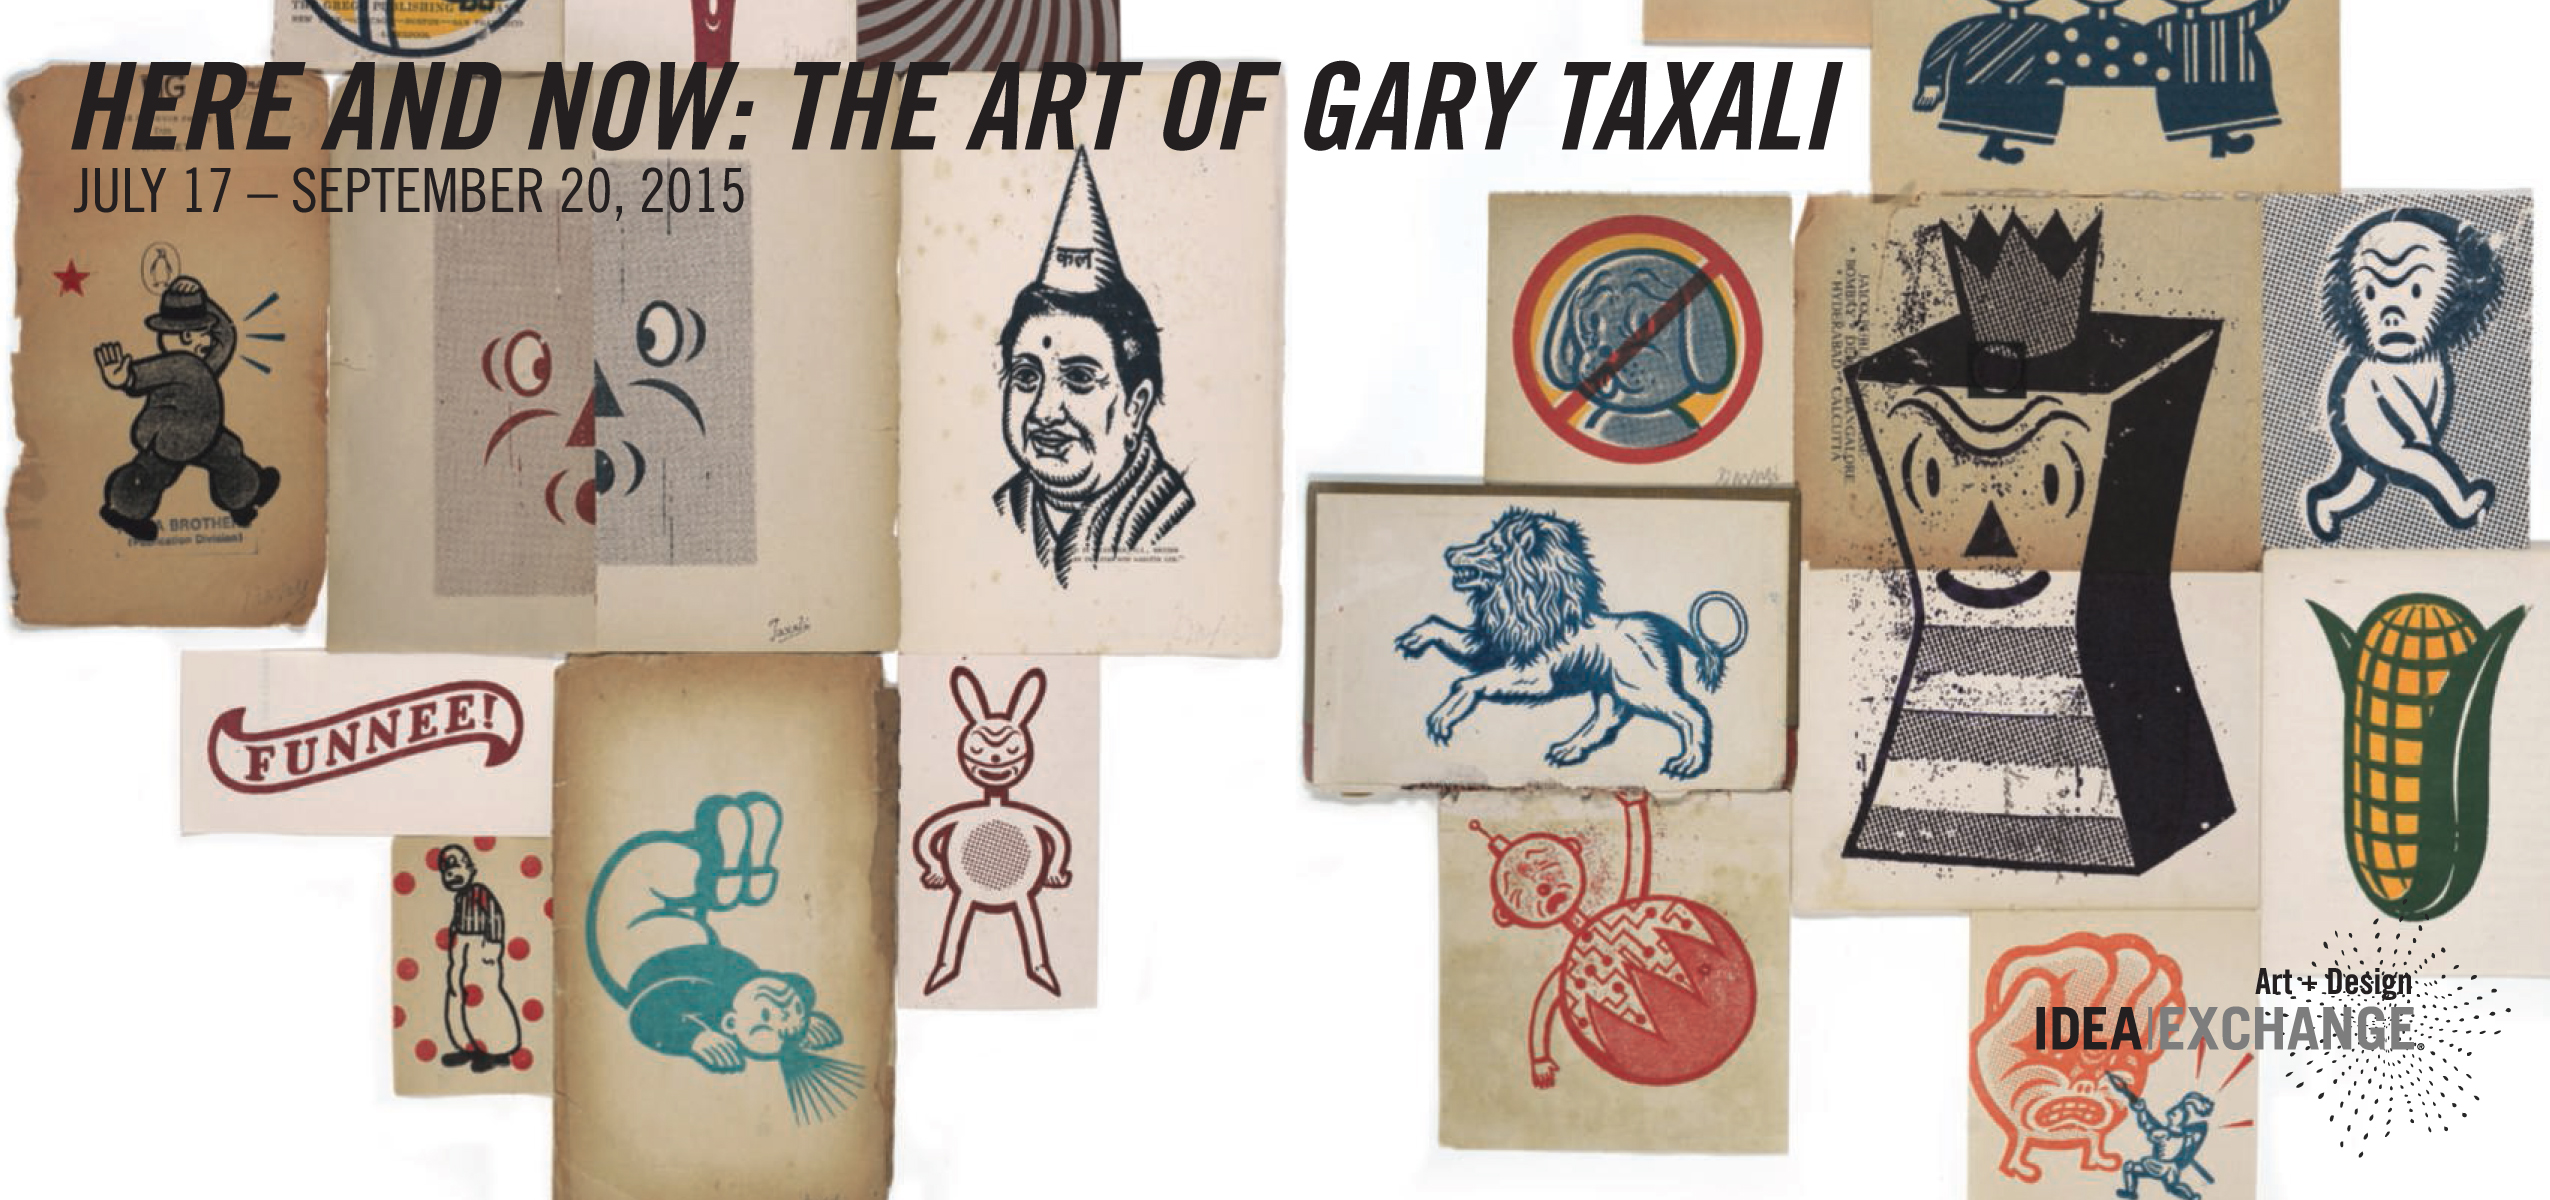 Pantsworthy: Here and Now: The Art of Gary Taxali